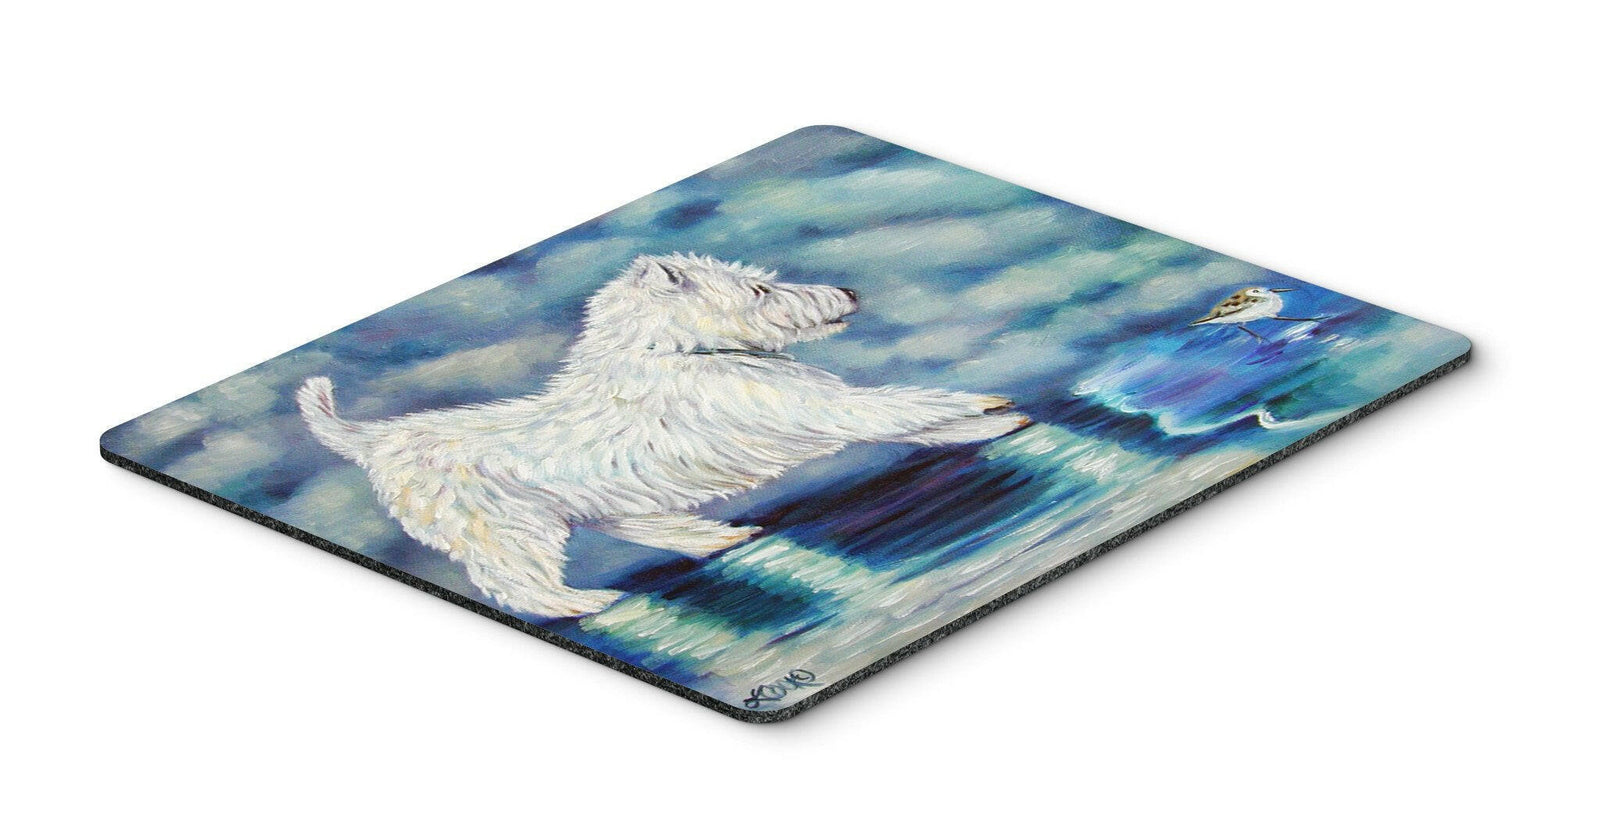 Misty Westie Mouse Pad, Hot Pad or Trivet 7334MP by Caroline's Treasures